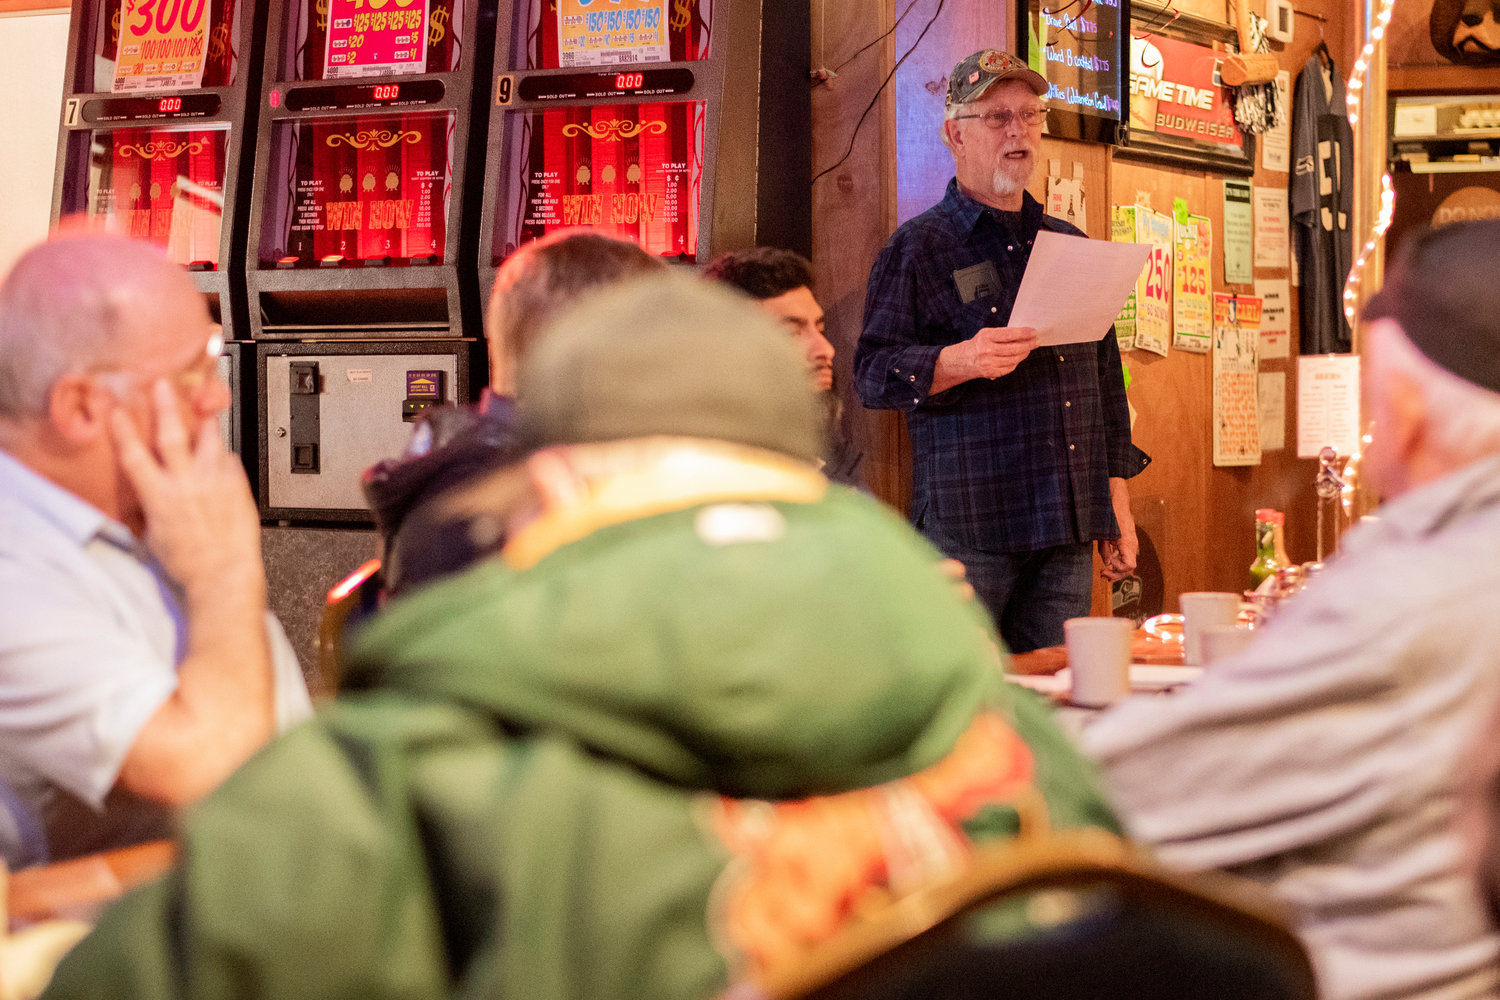 Jack Kerr, a marine veteran who works with his wife Kathy Heimbigner to organize meetings with other local veterans, introduces speakers at the Tall Timber Restaurant Lounge in Randle. Kathy A. Heimbigner is the author of this commentary.